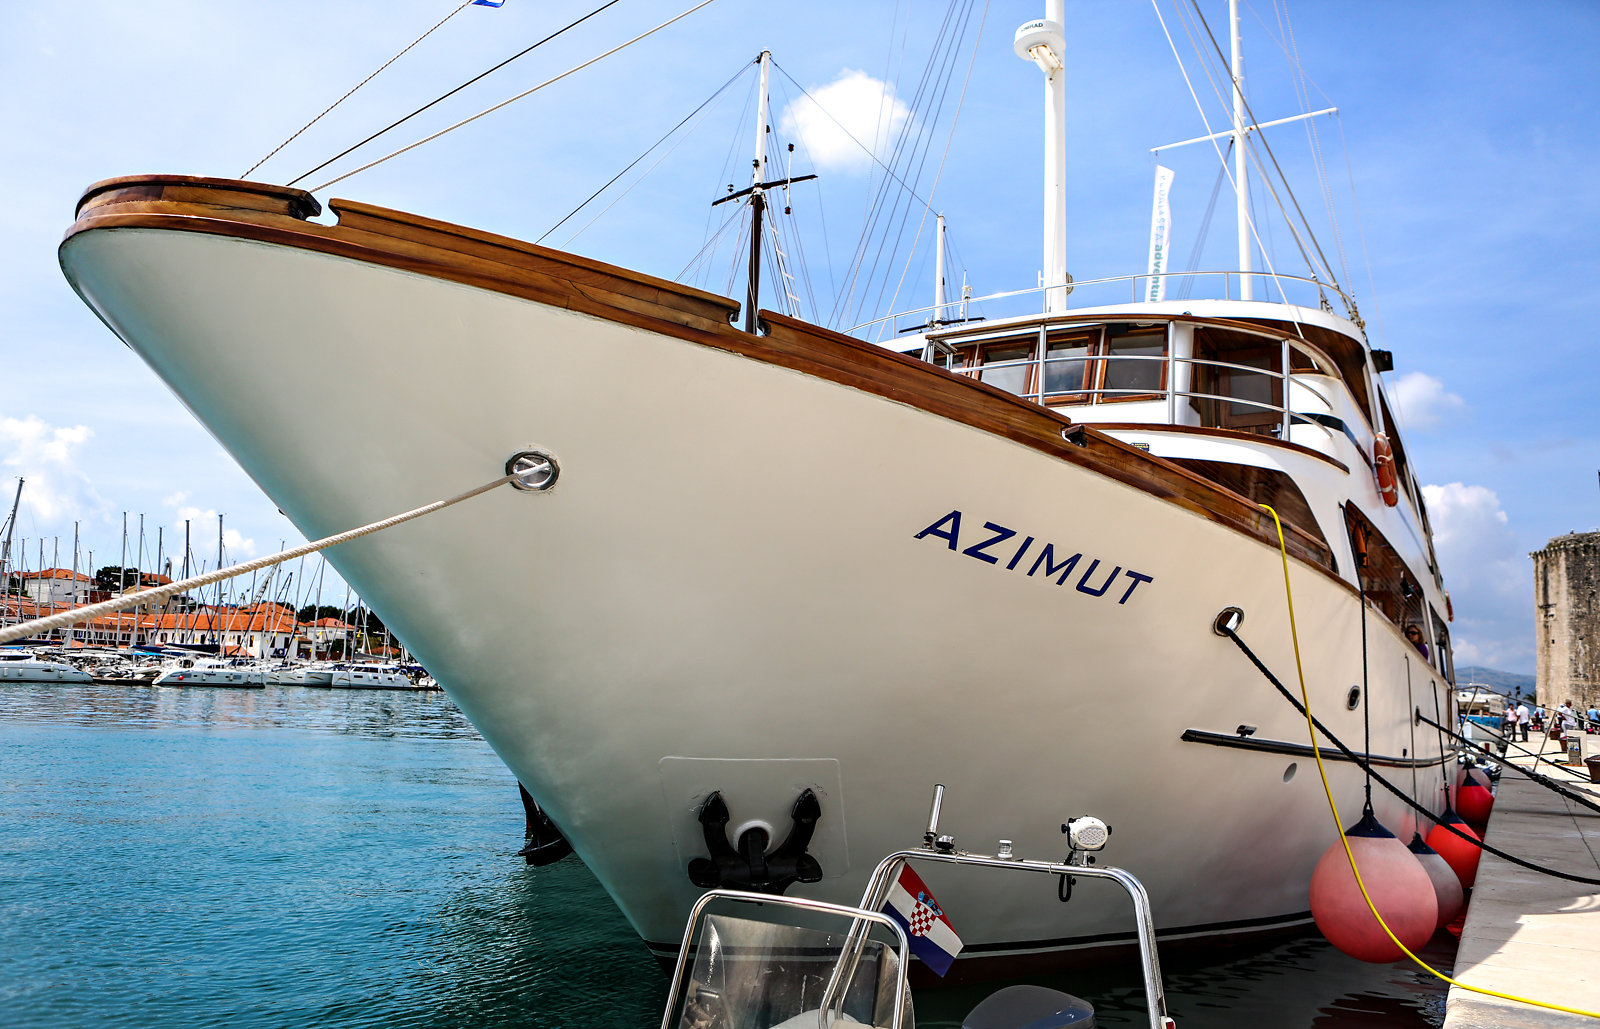 The Azimut boat for bicycle tours in Croatia